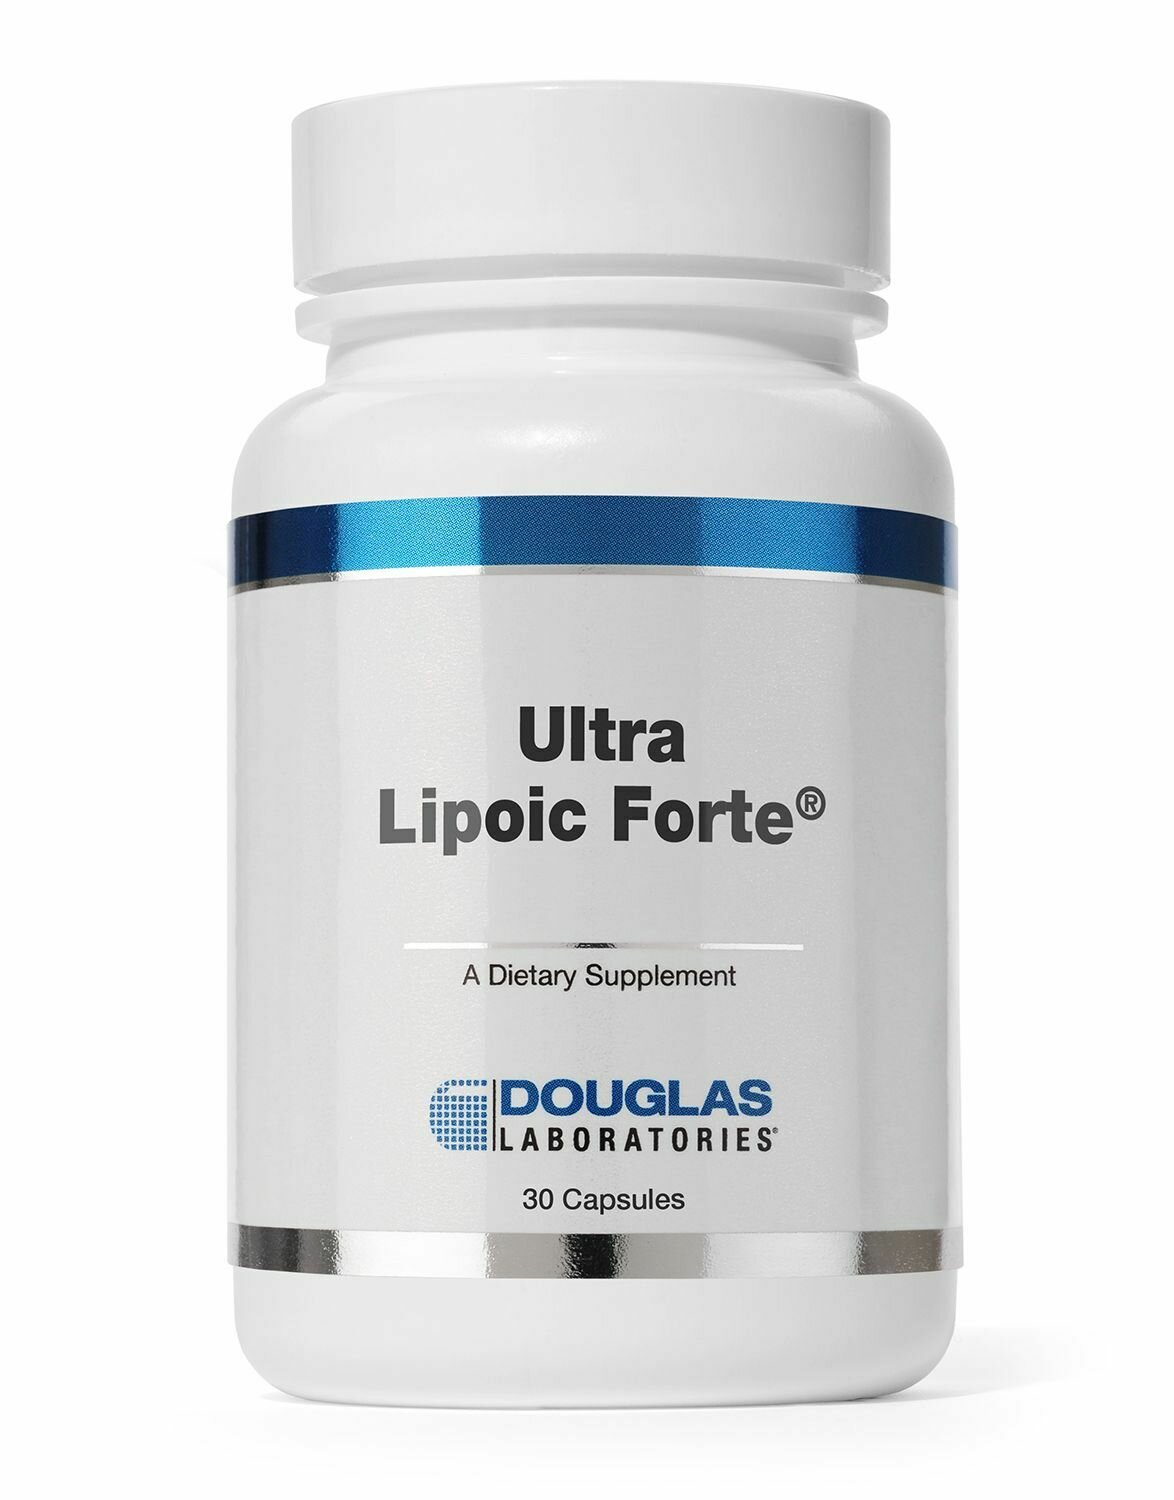 Ultra-Lipoic Forte ® (60 count)